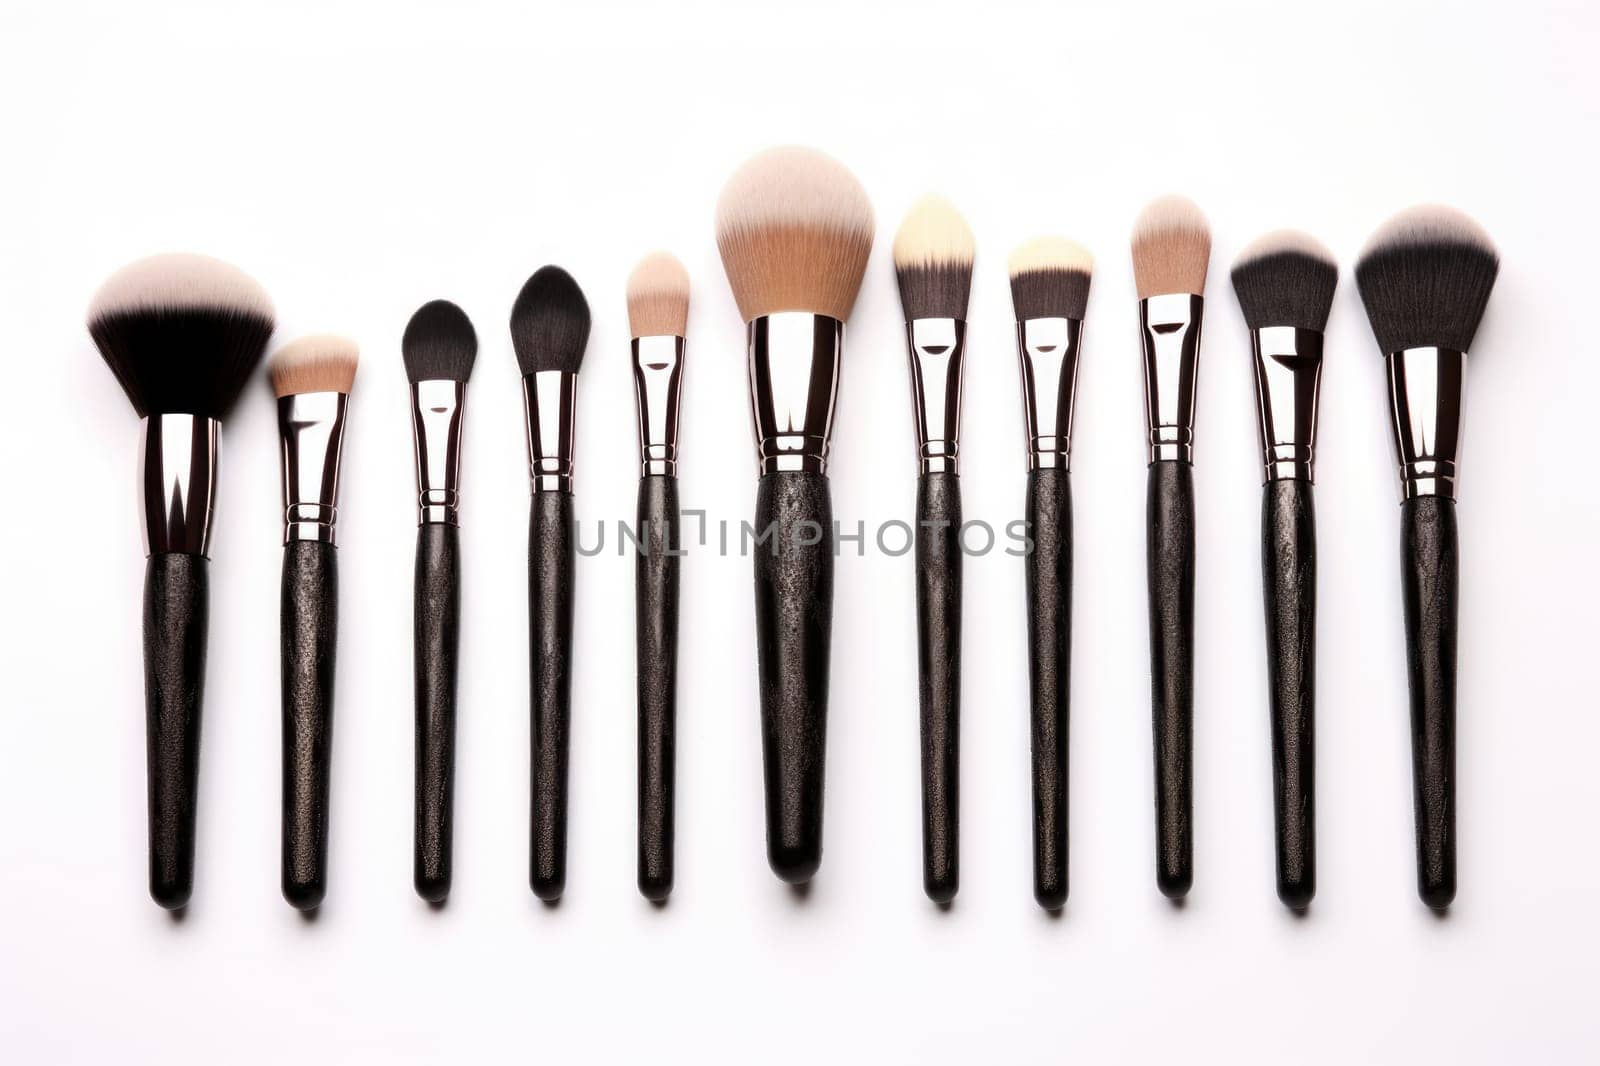 Set of professional makeup brushes on a white background.